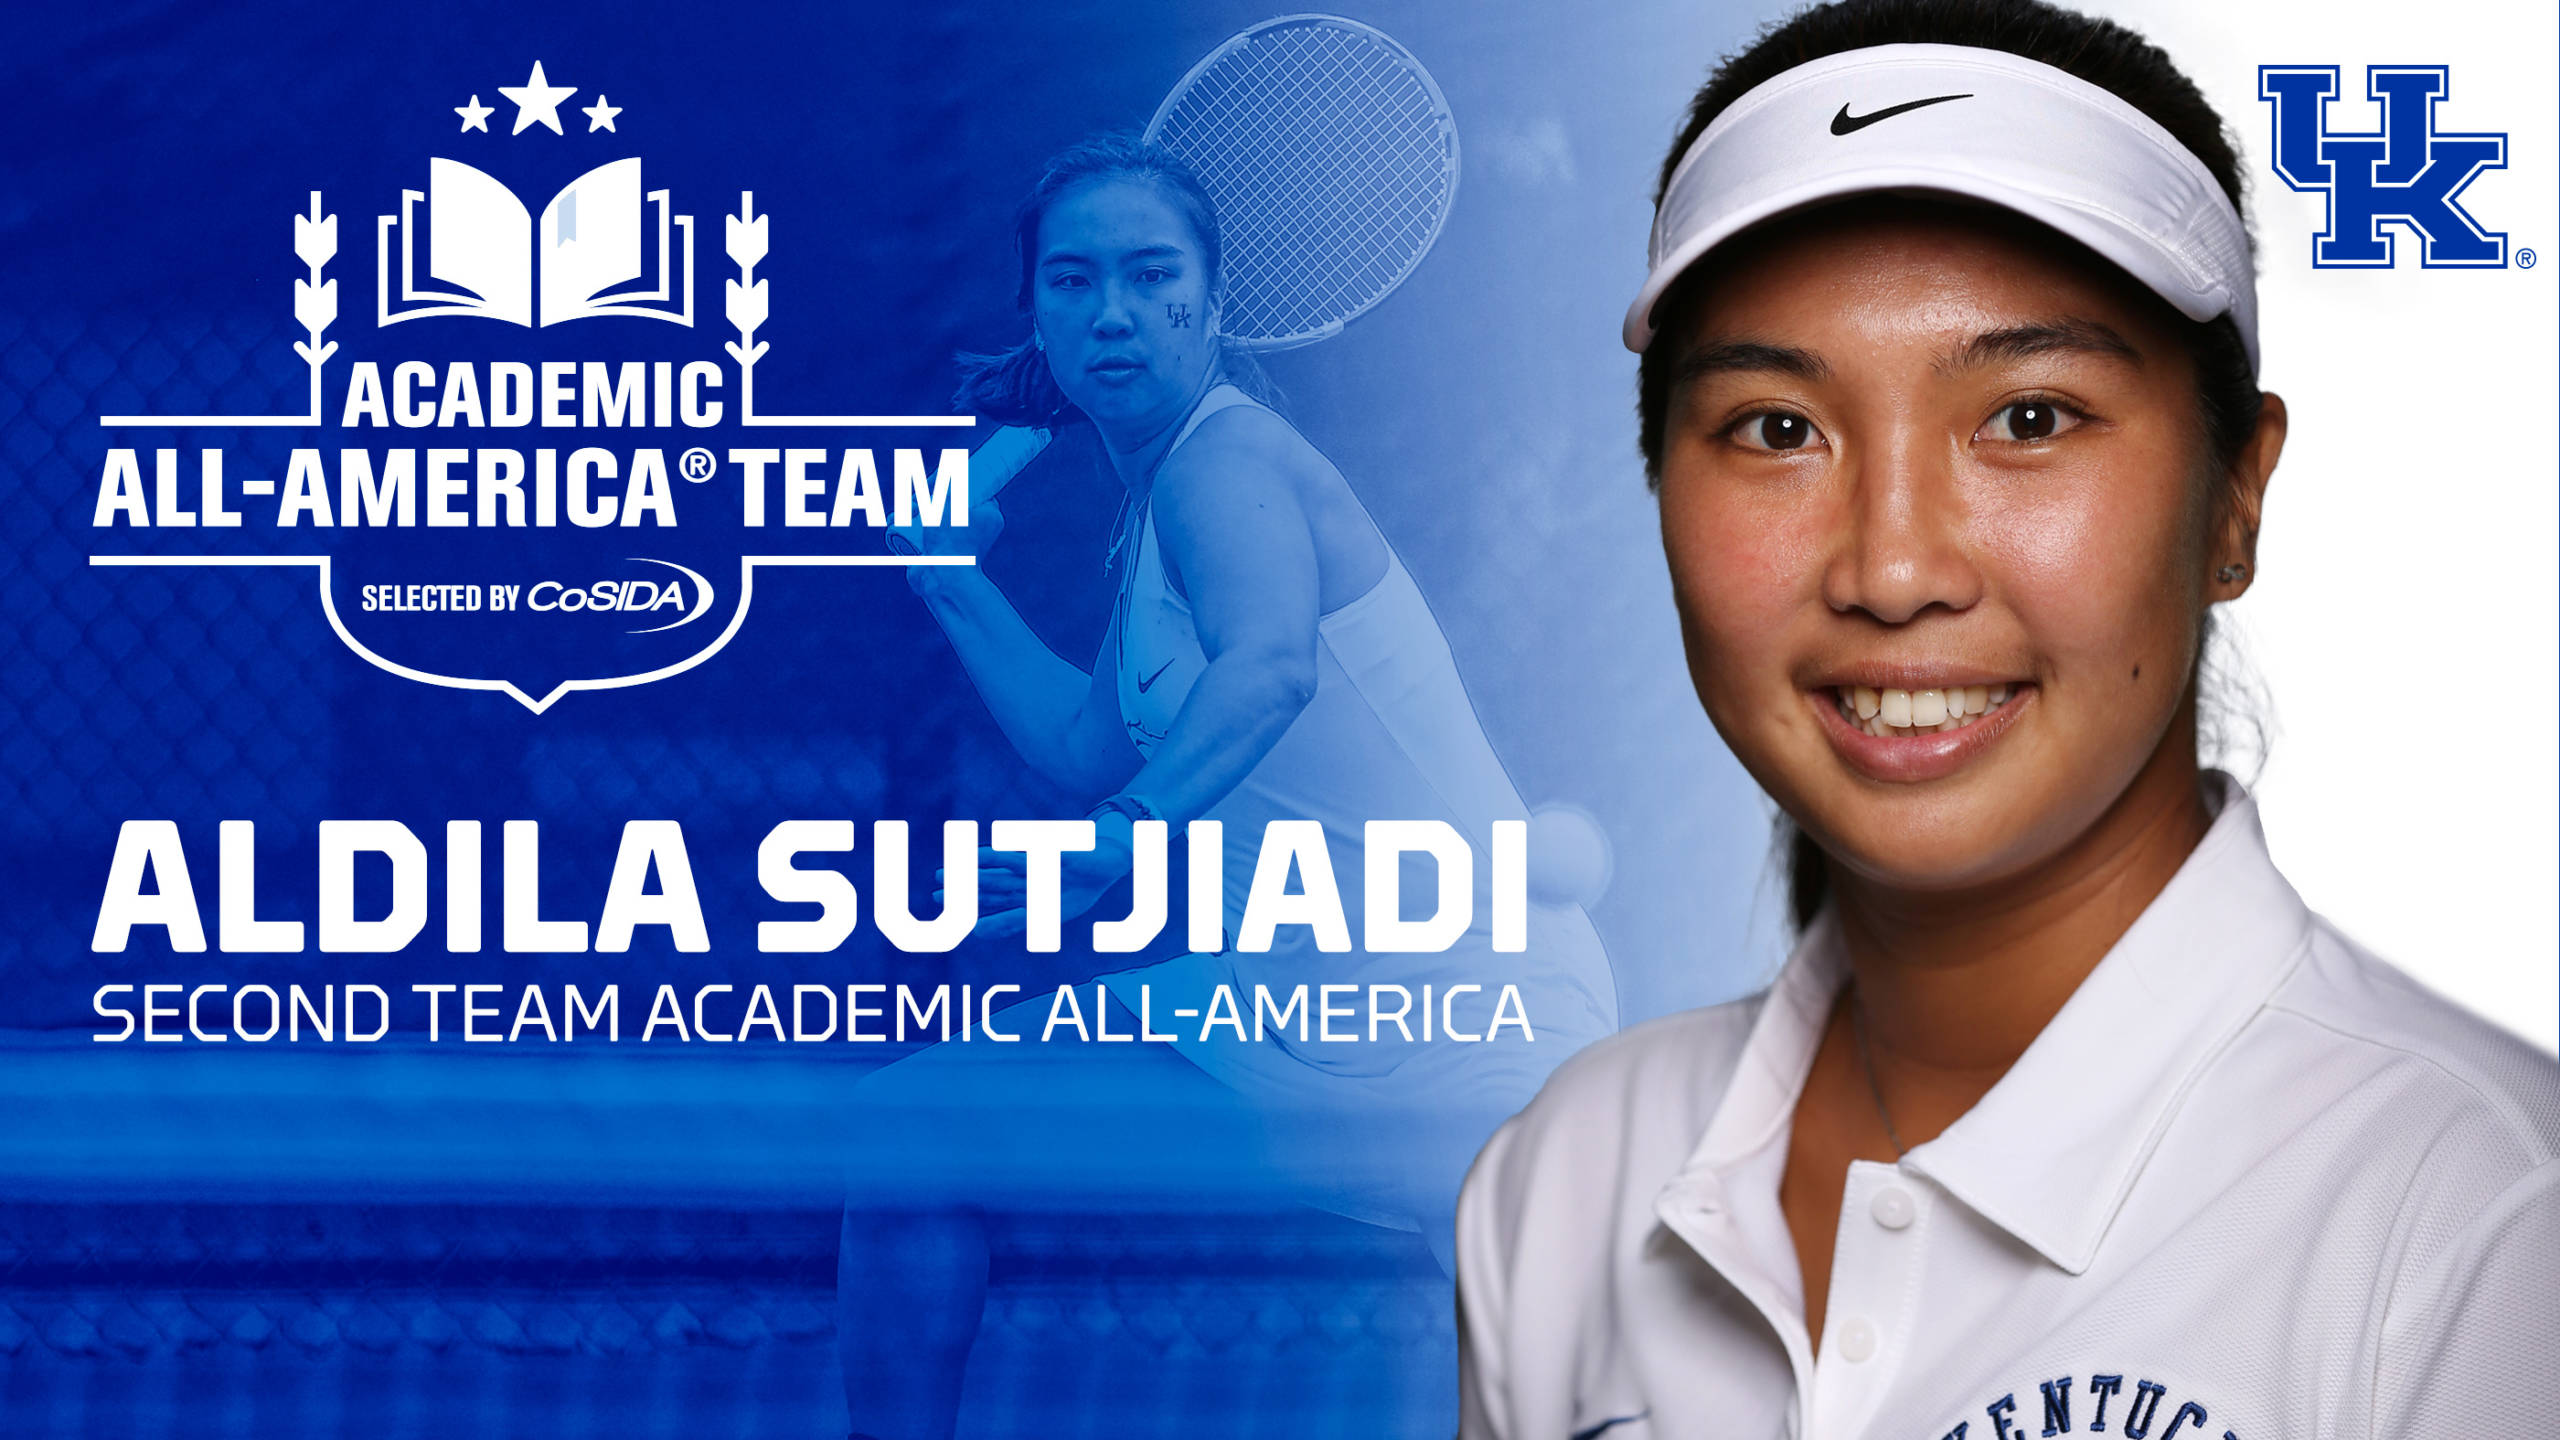 Sutjiadi Named to CoSIDA Academic All-America At-Large Second Team